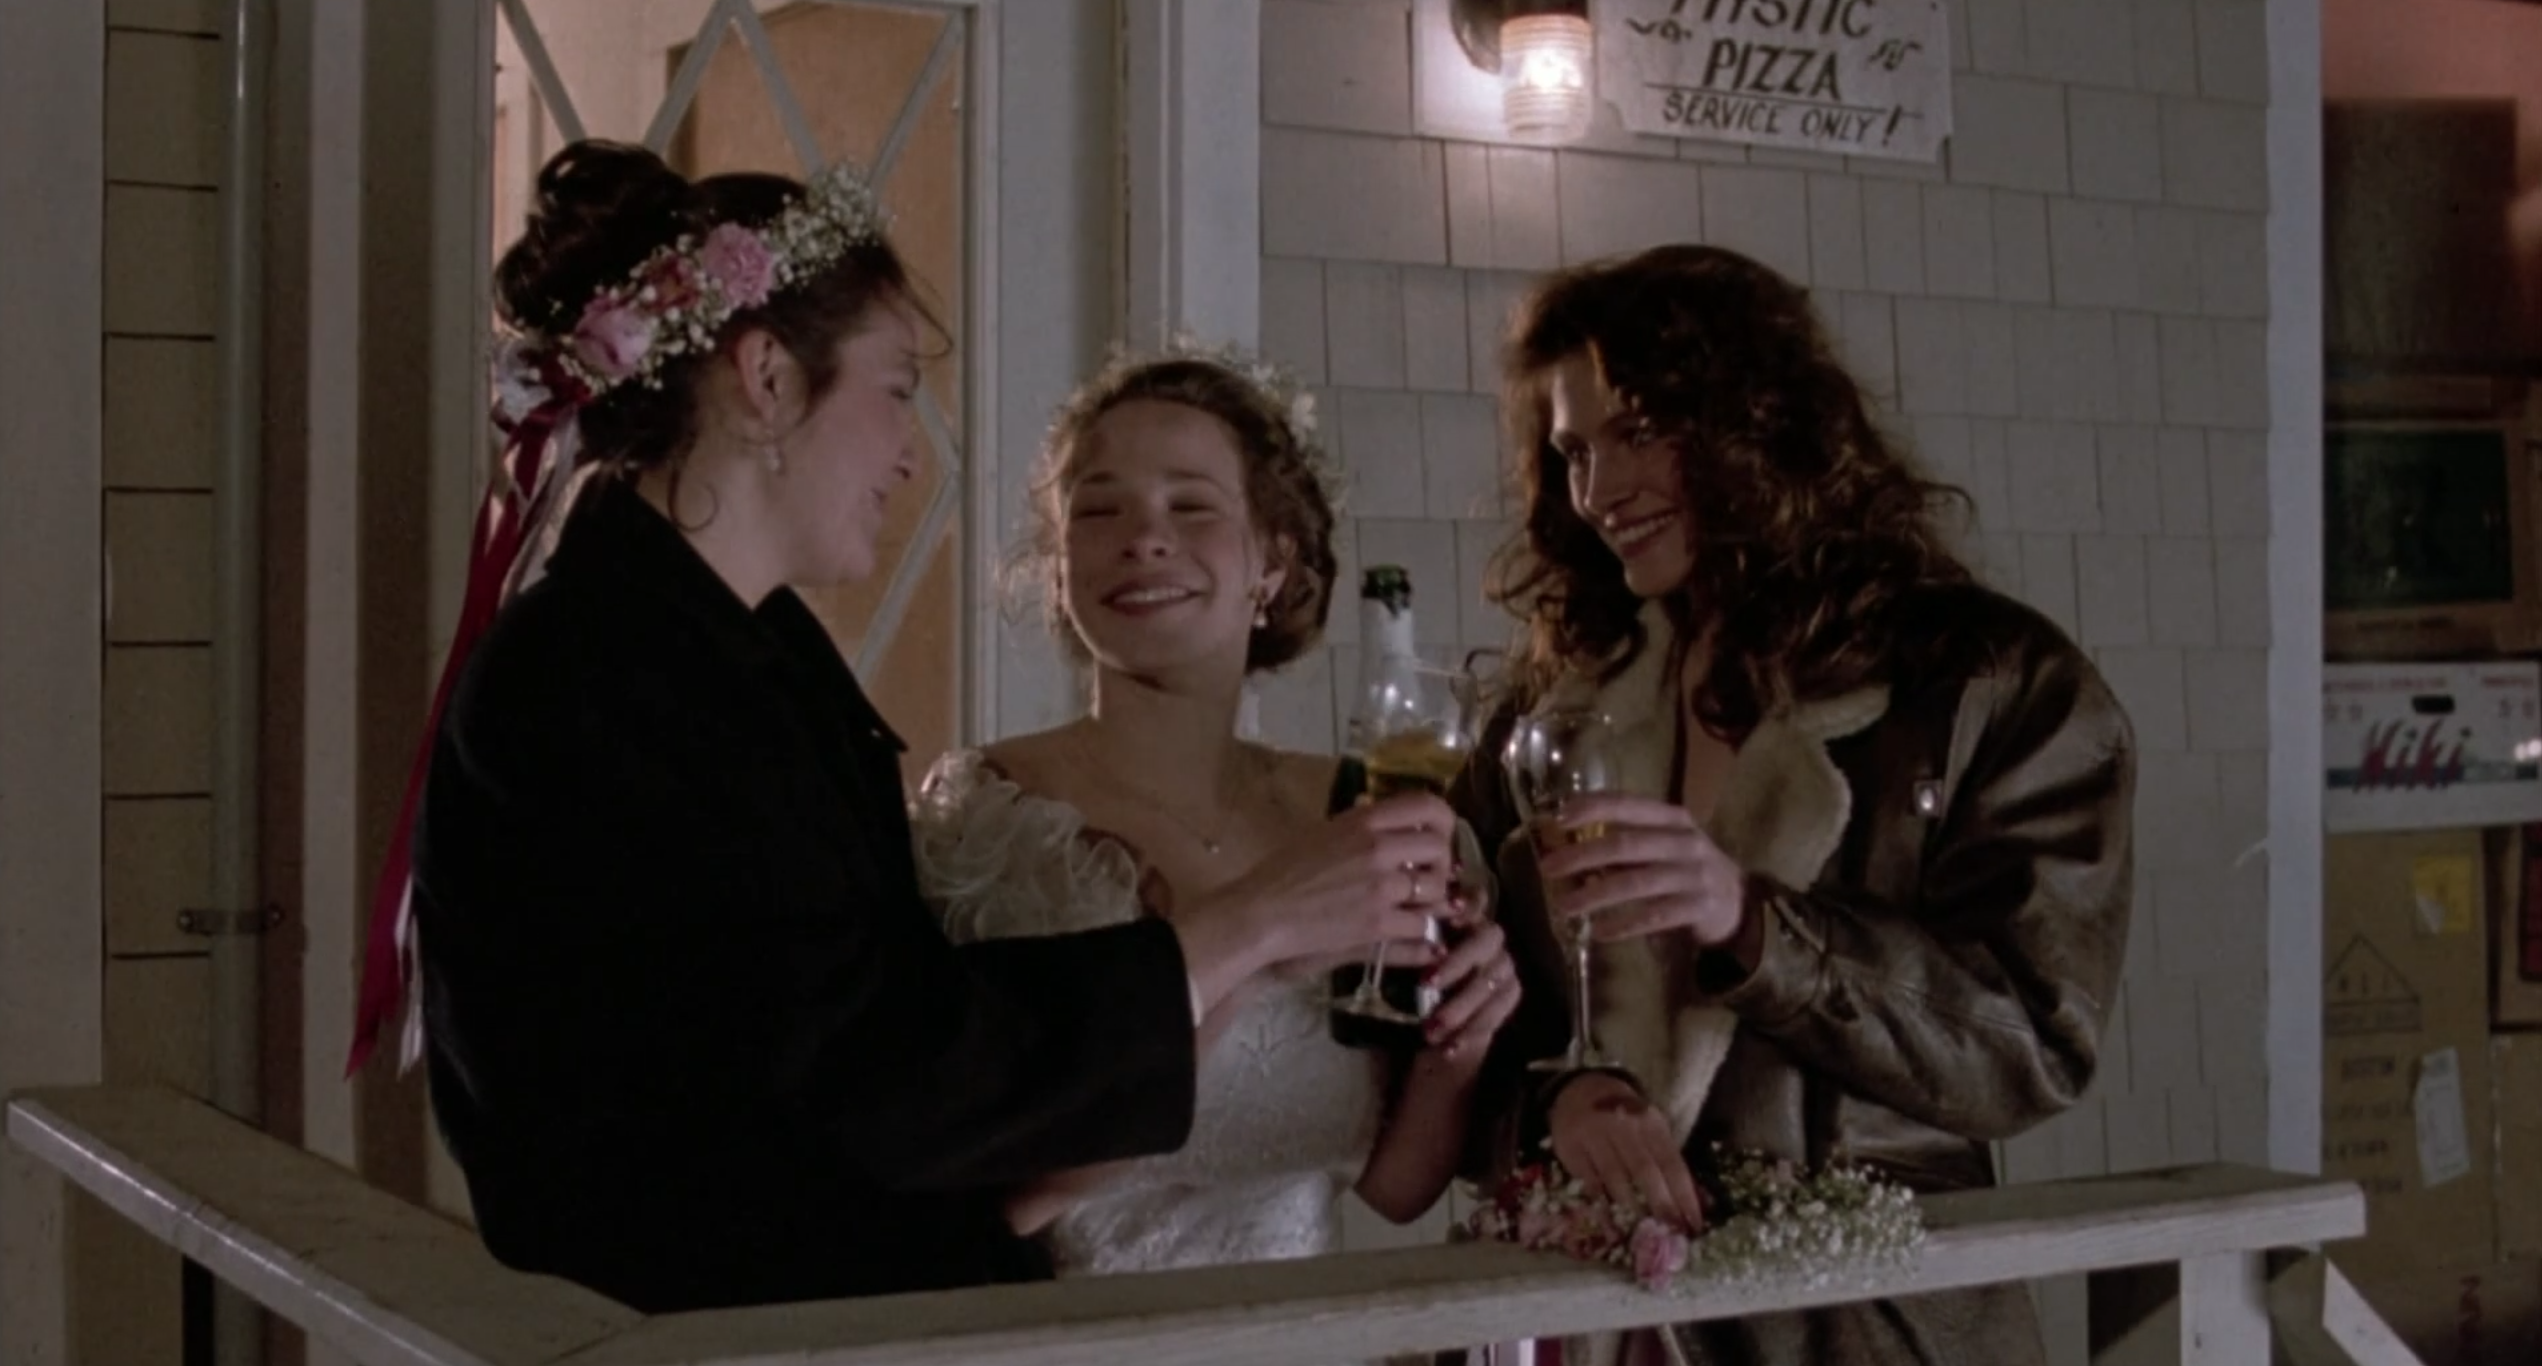 Three best friends cheering their wine glasses together at a wedding